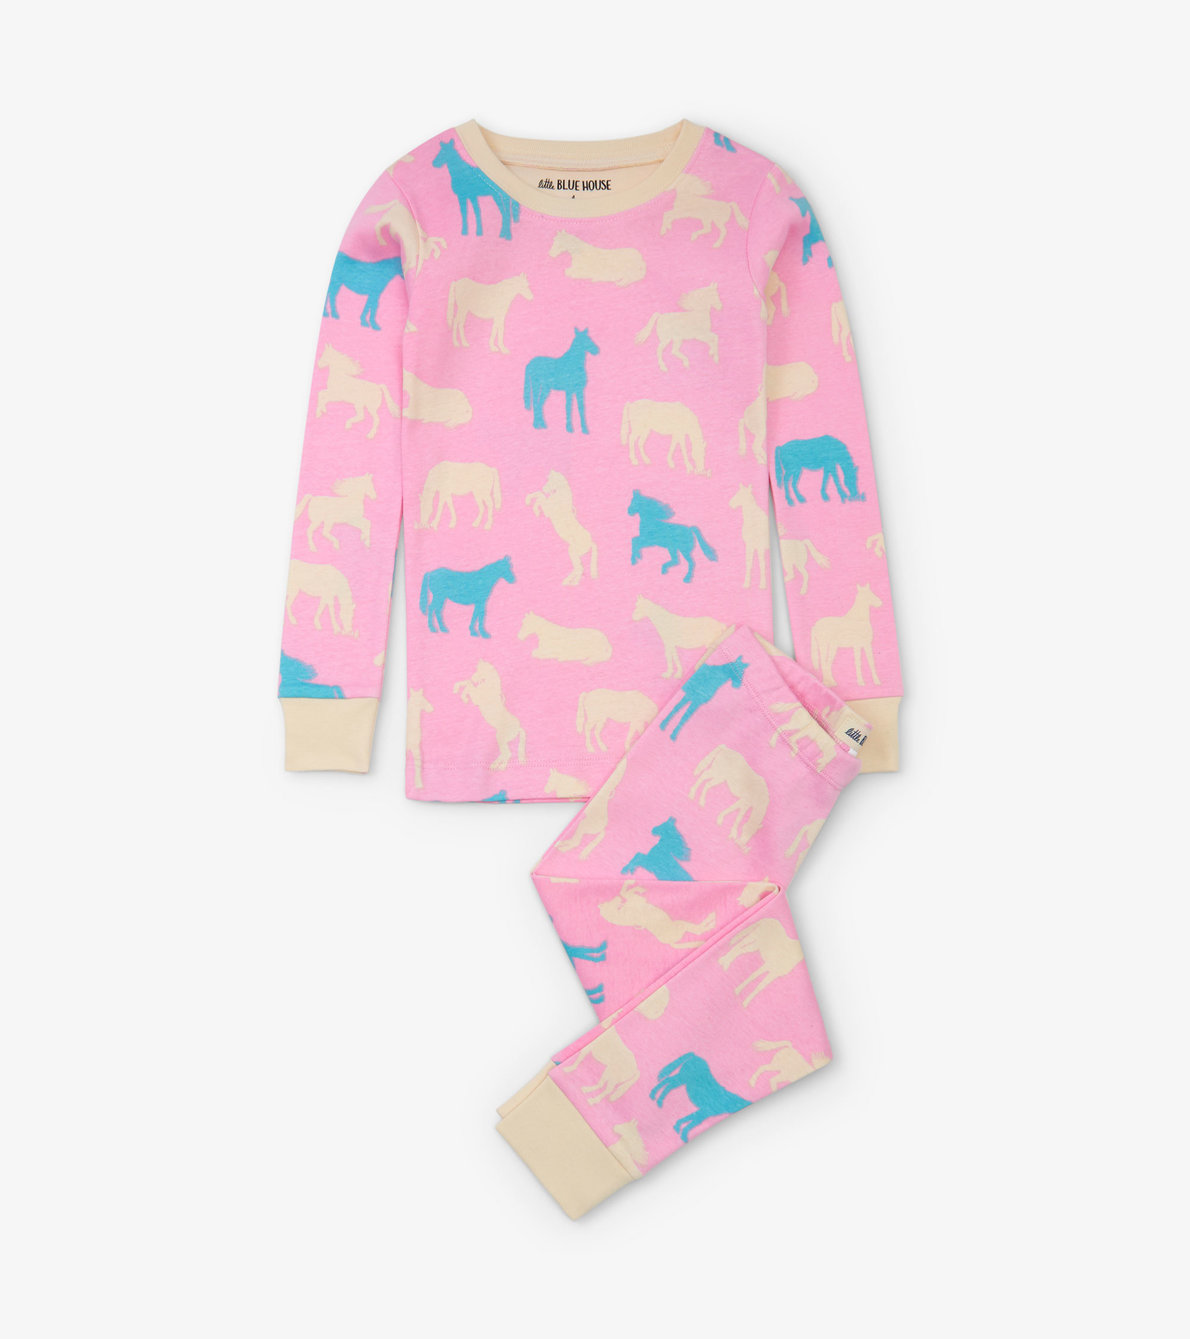 View larger image of Horse Silhouettes Kids Pajama Set